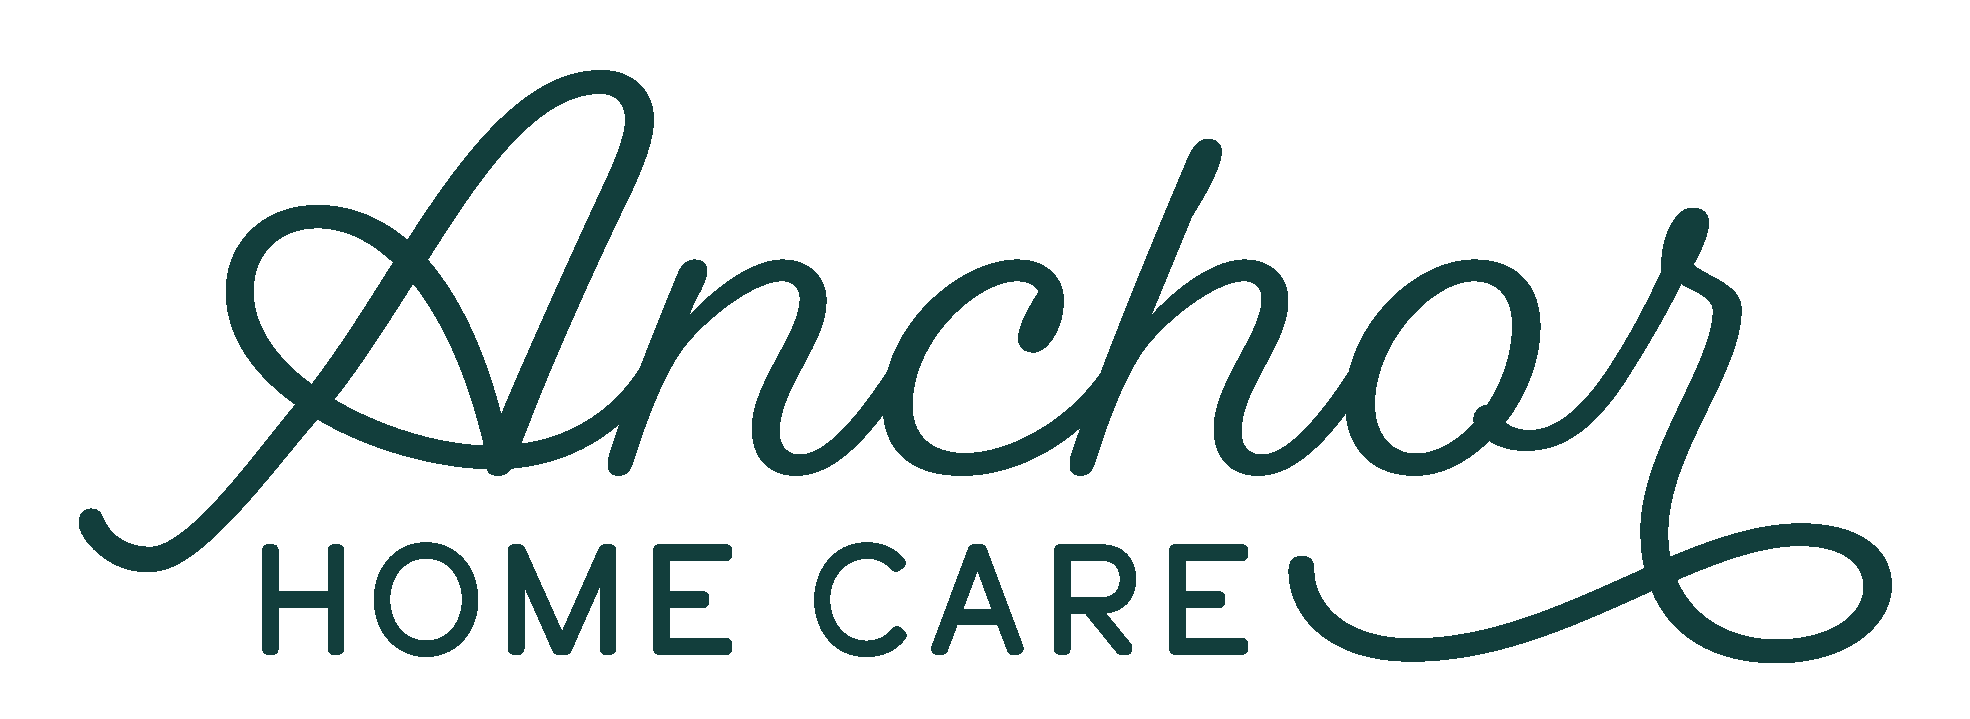 Anchor Home Care_Primary_Teal.png